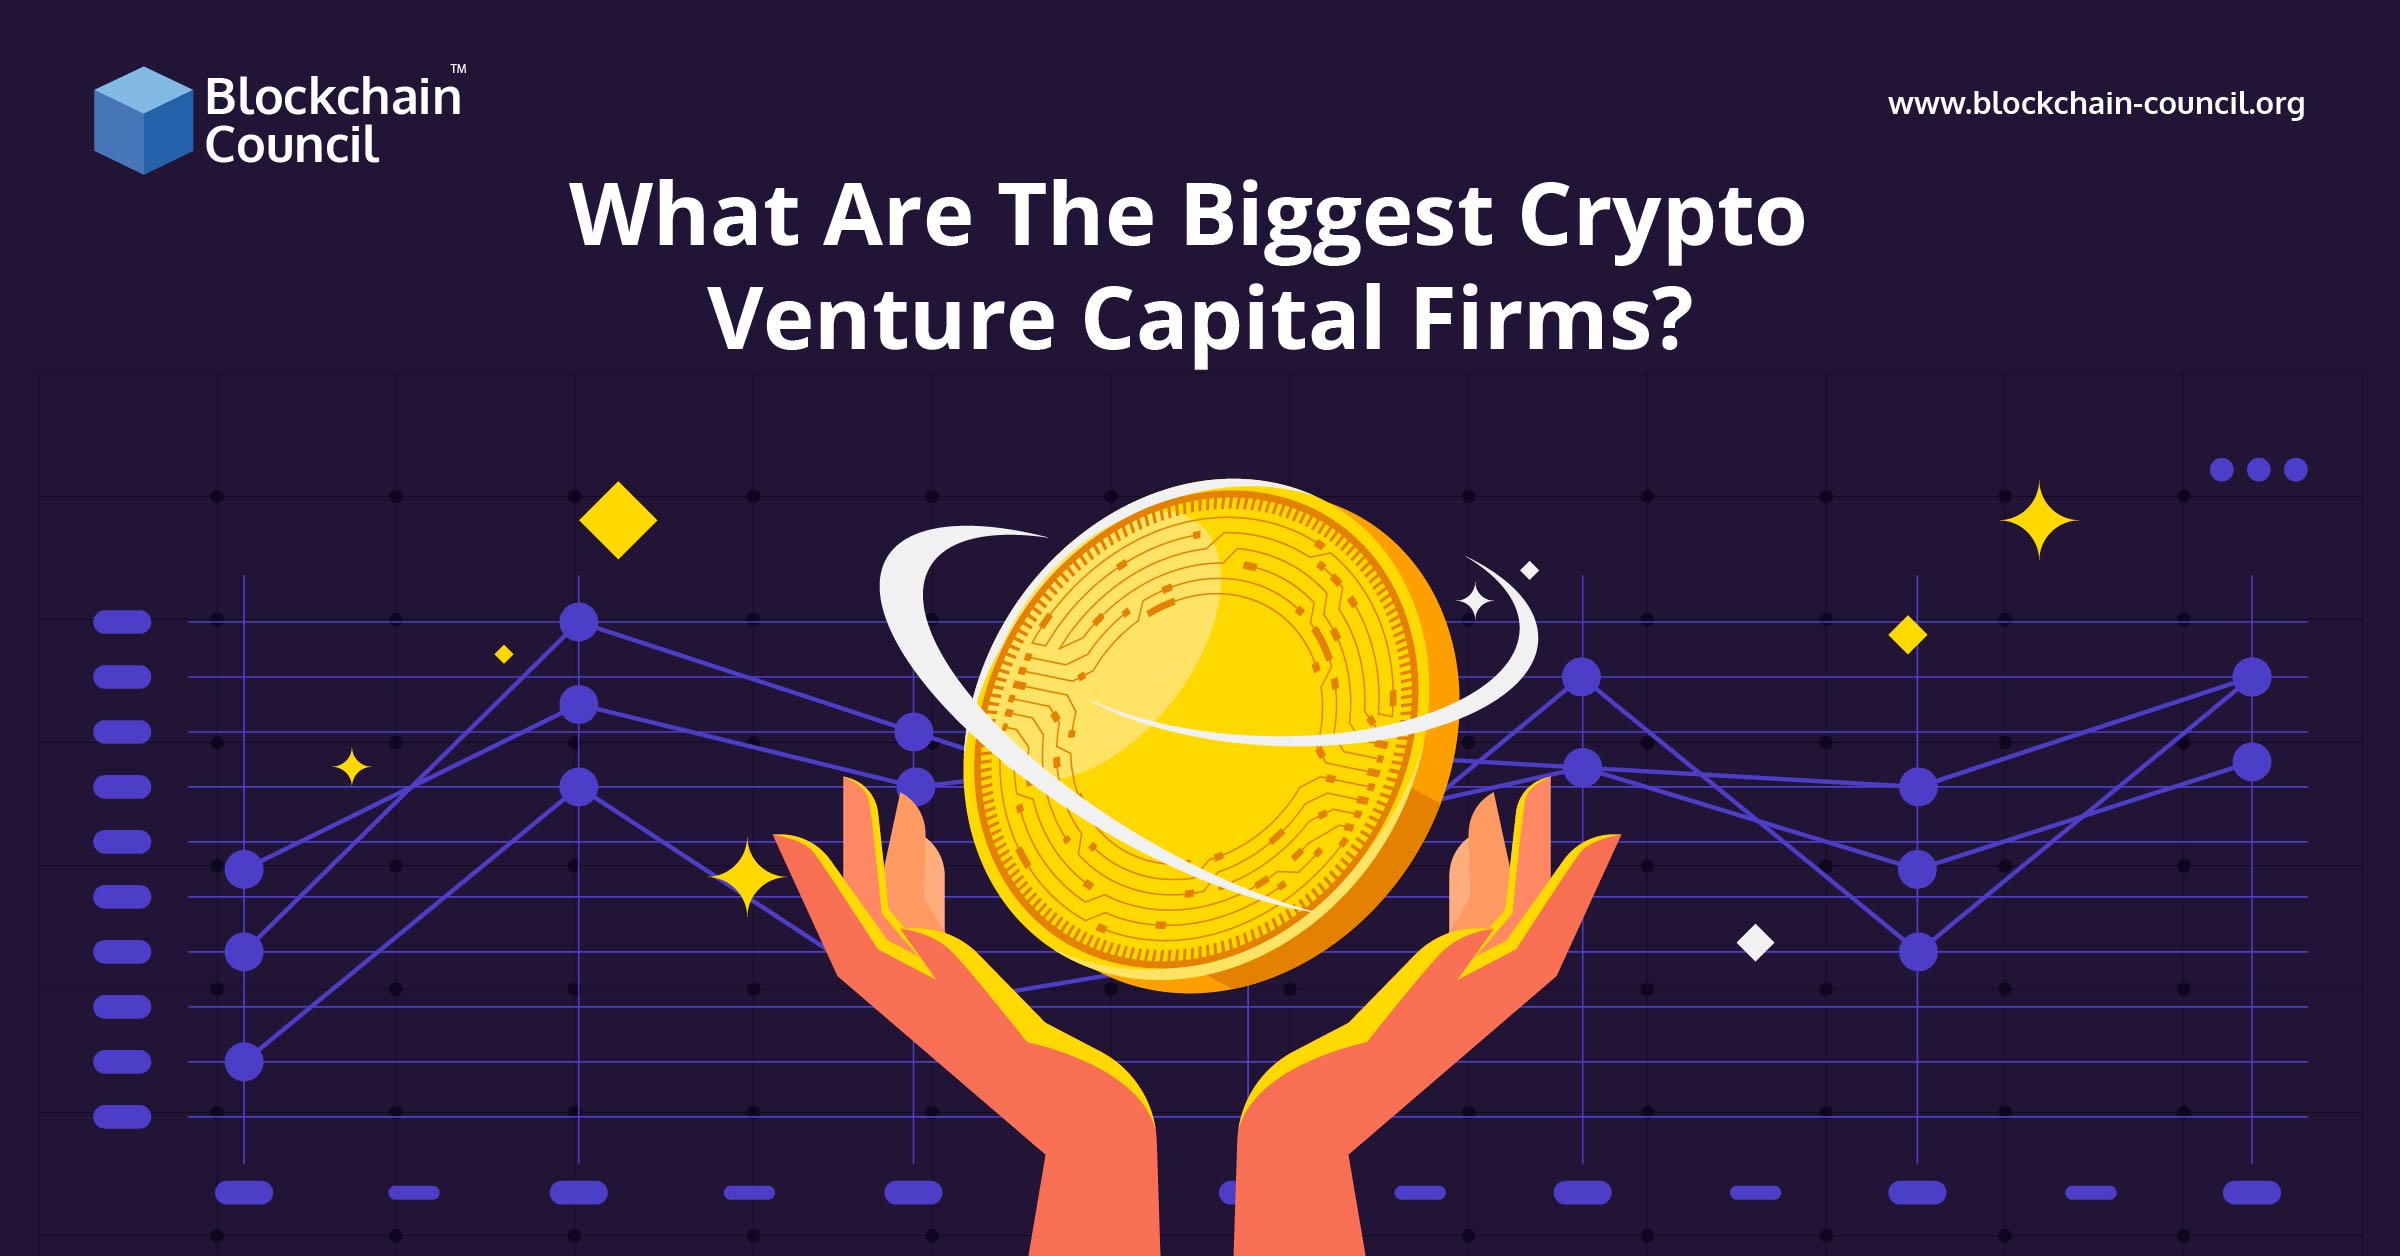 What Are The Biggest Crypto Venture Capital Firms?